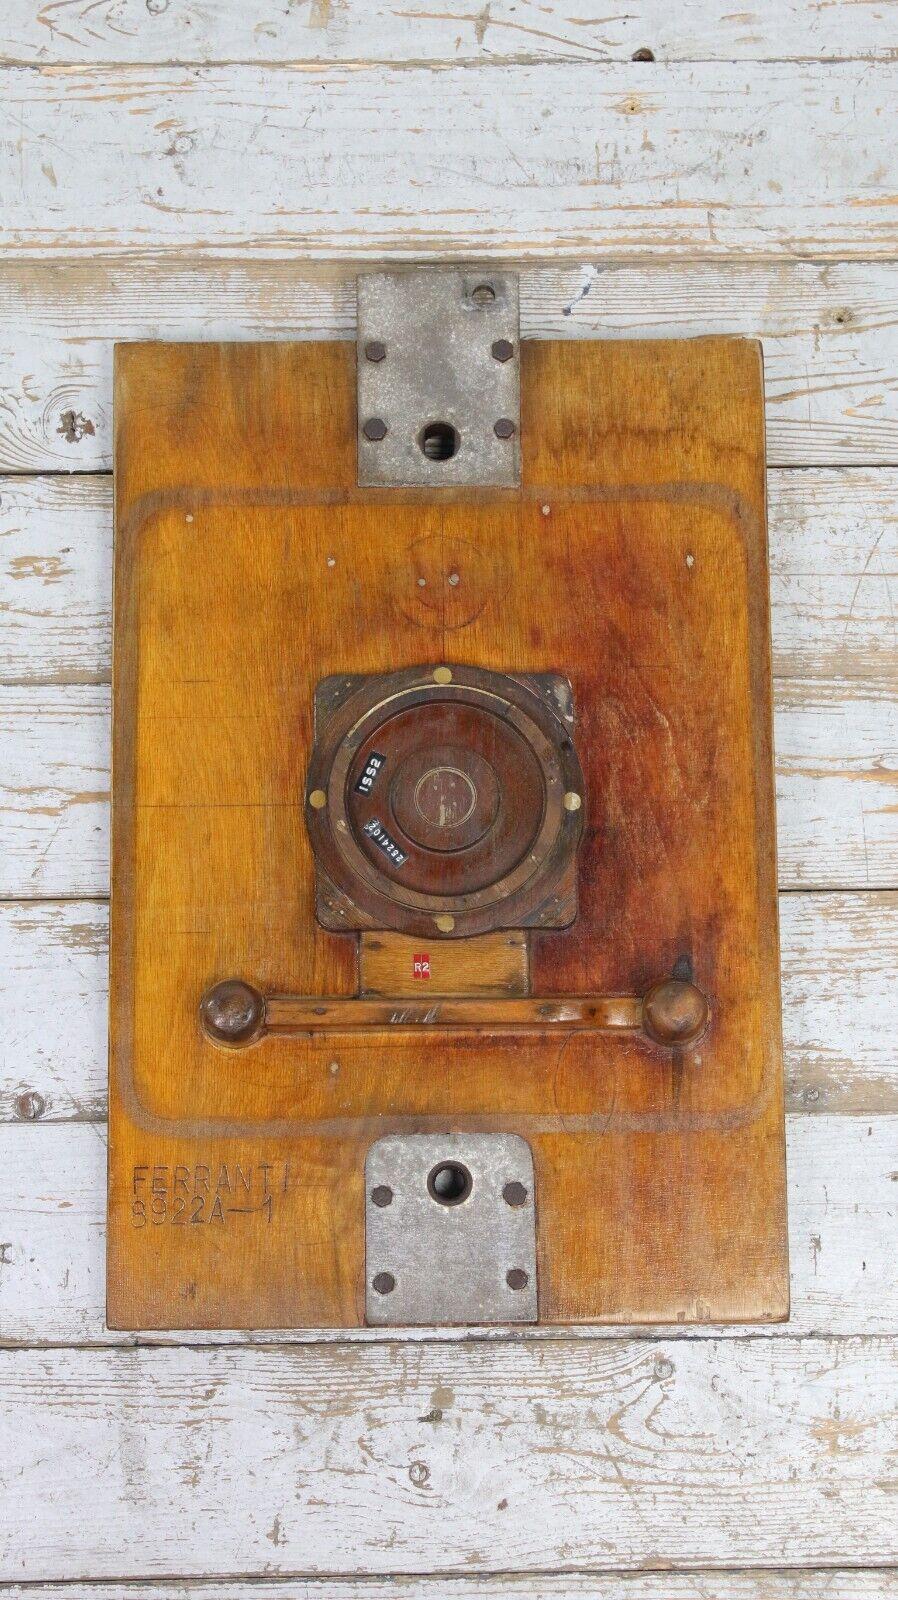 Mixed Wood Factory Mould from the Mid-20th Century adds an industrial touch to your home or office. The mould dates back to circa 1960s and is made from mixed wood, providing excellent patina. It can be affixed to any wall and used as wall decor or